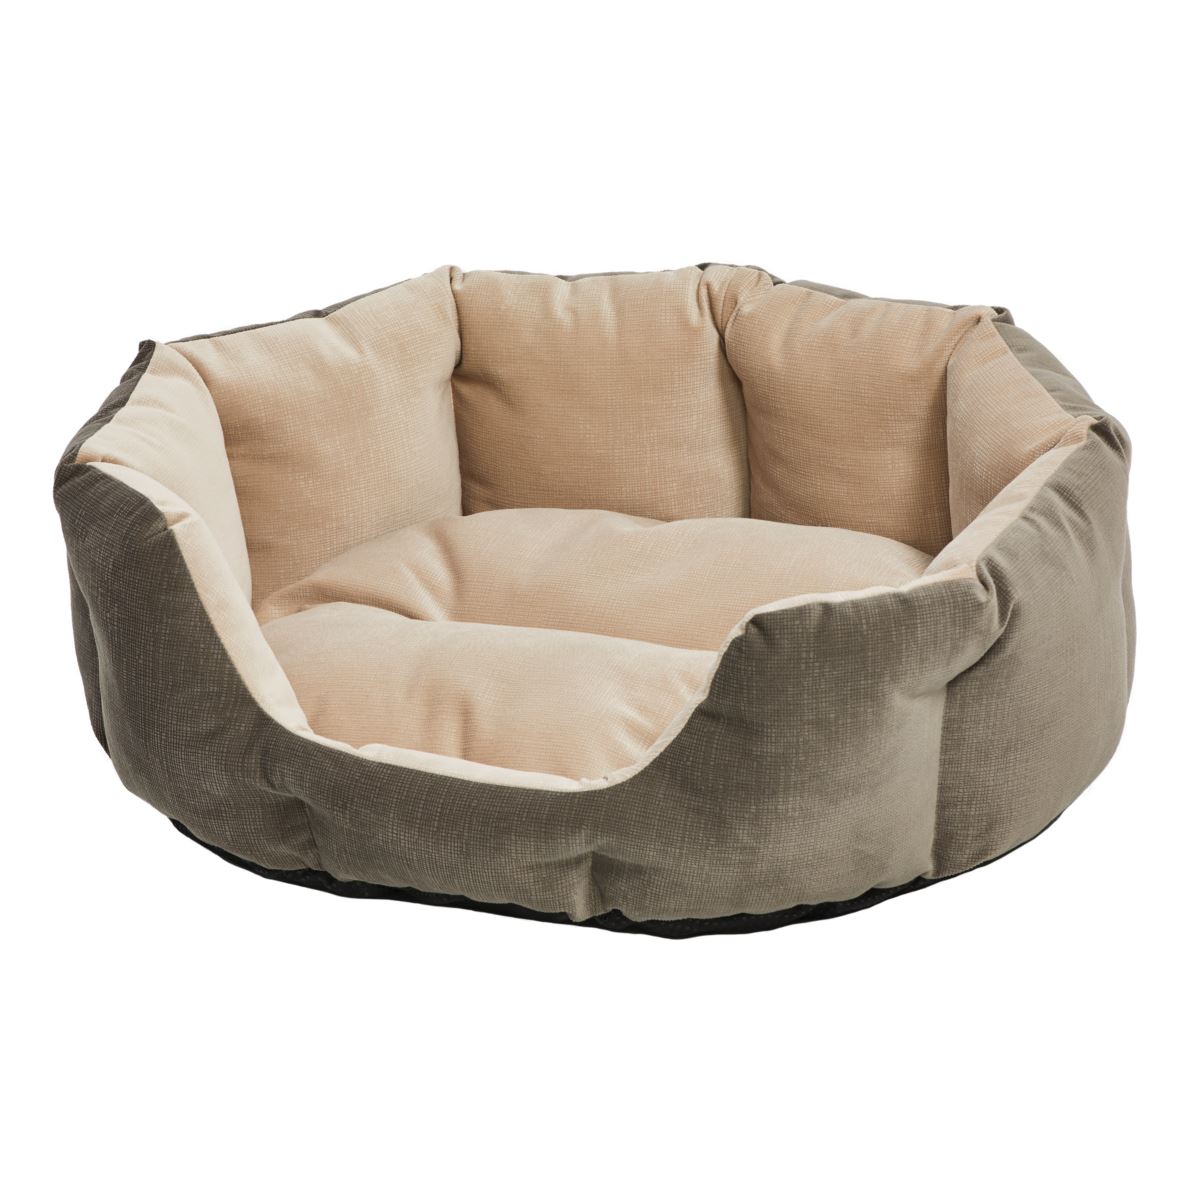 Midwest QuietTime Deluxe Gray Tulip Bed - SMALL